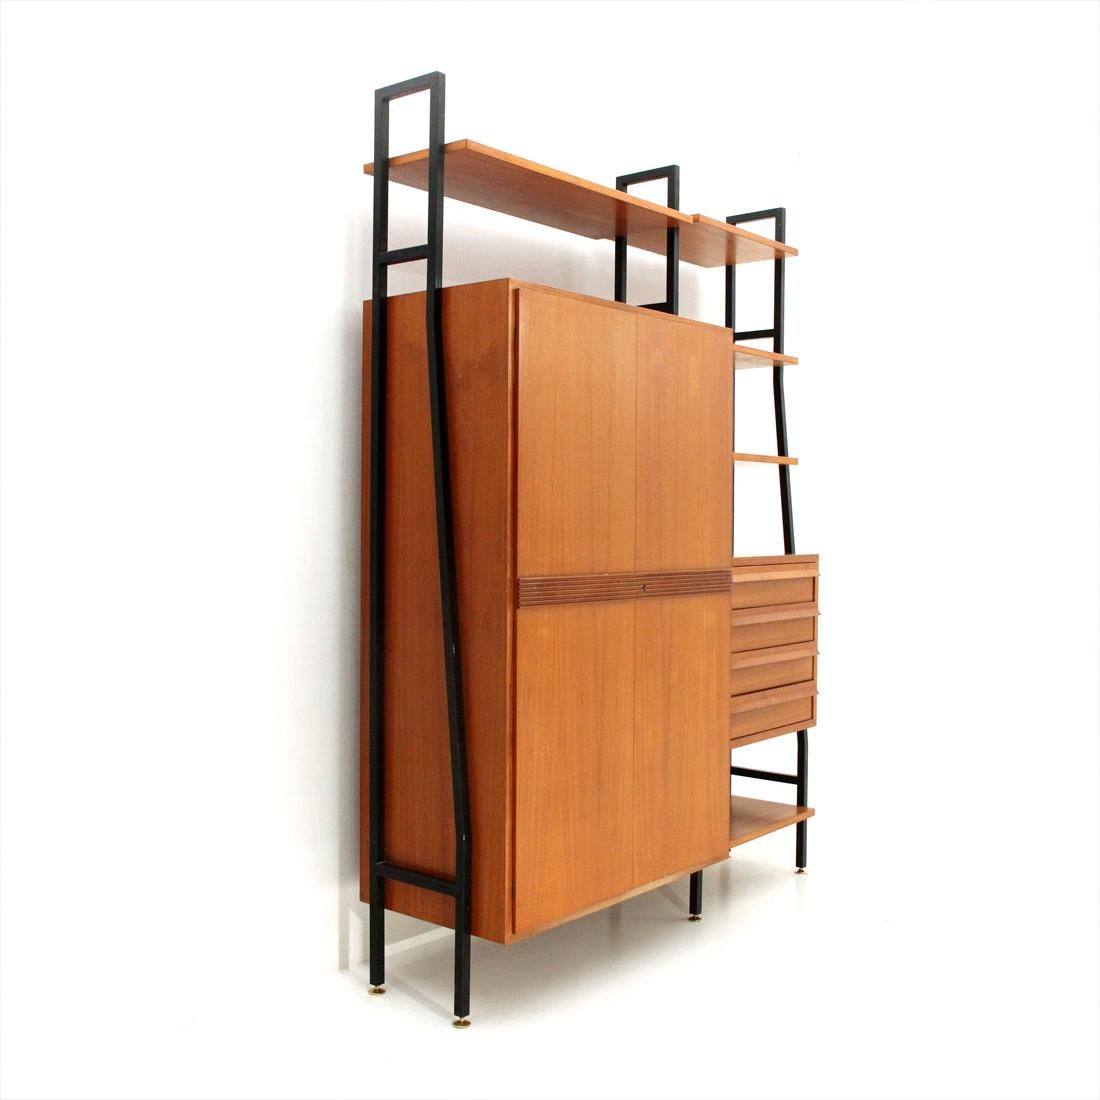 Italian manufacture wall unit produced in the 1950s.
Uprights in black painted metal with height-adjustable brass foot.
Two-door wardrobe, chest of drawers and 5 shelves in veneered wood.
Inside the wardrobe there are two removable hangers.
Good